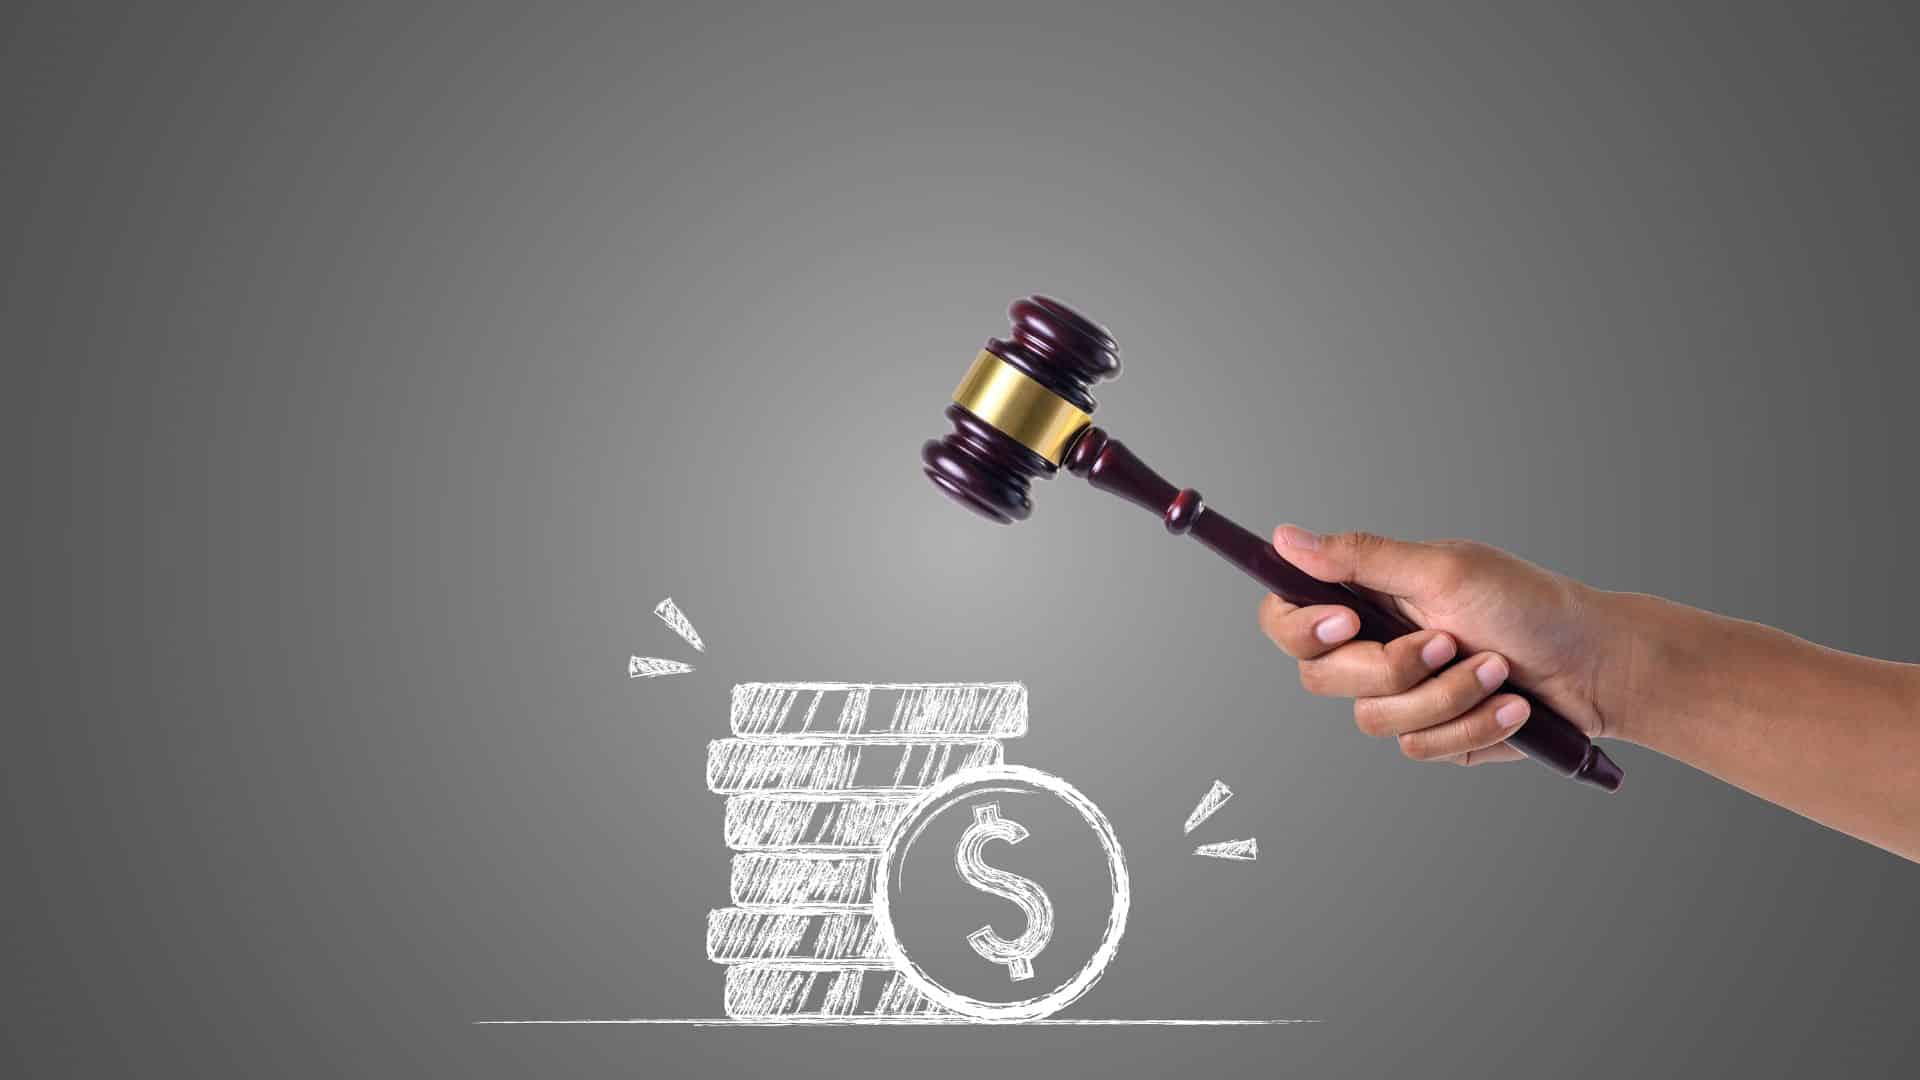 how much does a personal injury lawyer cost